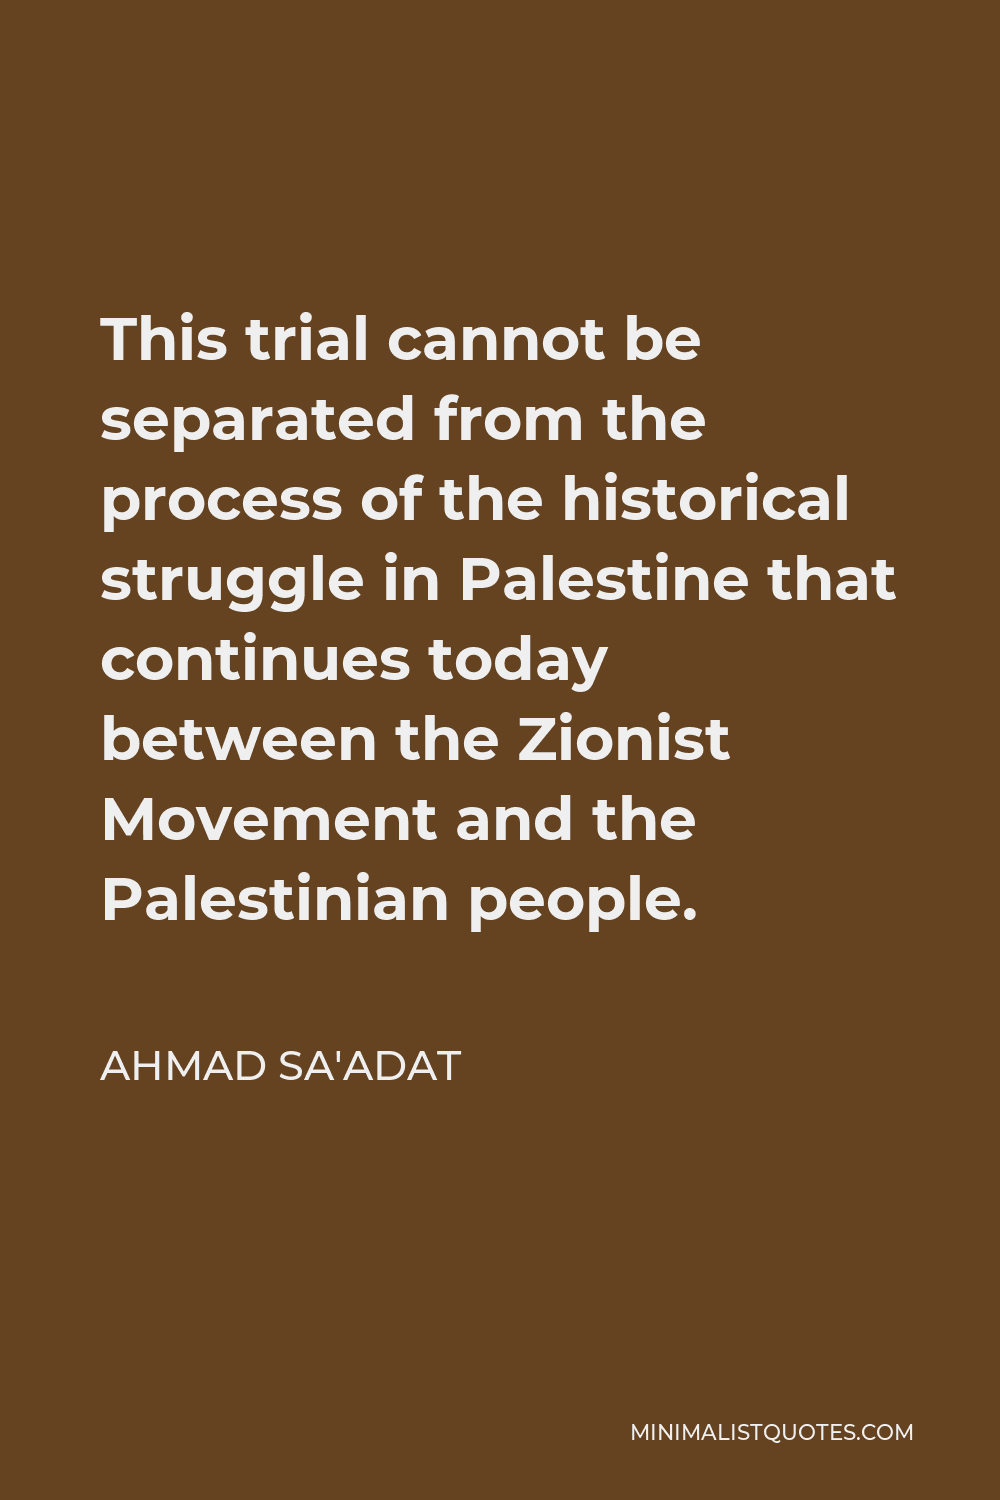 Ahmad Sa'adat Quote - This trial cannot be separated from the process of the historical struggle in Palestine that continues today between the Zionist Movement and the Palestinian people.